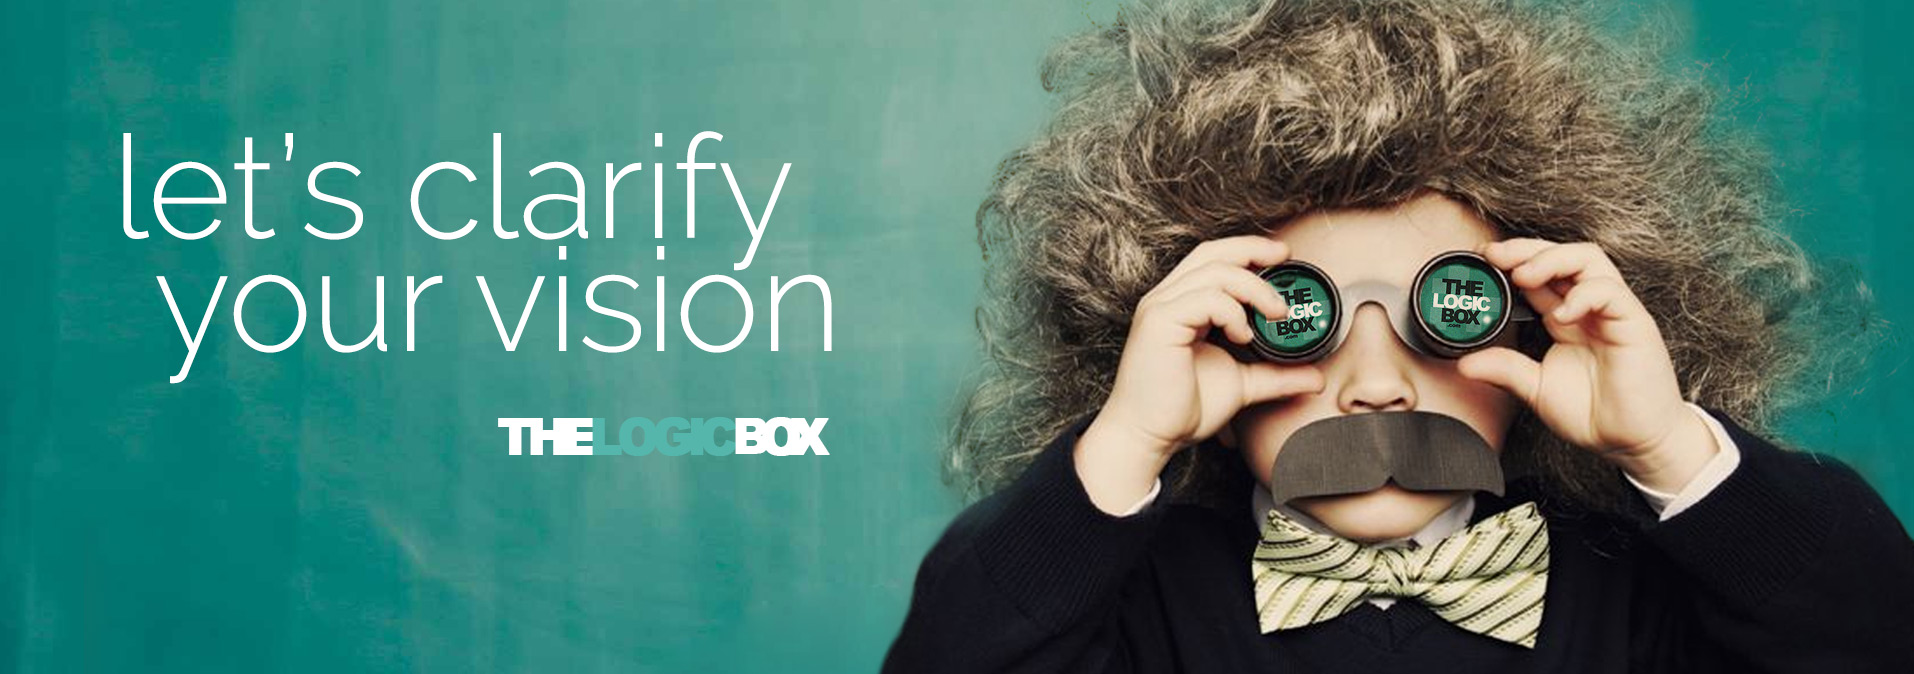 the-logic-box--header-lets-clarify-your-vision